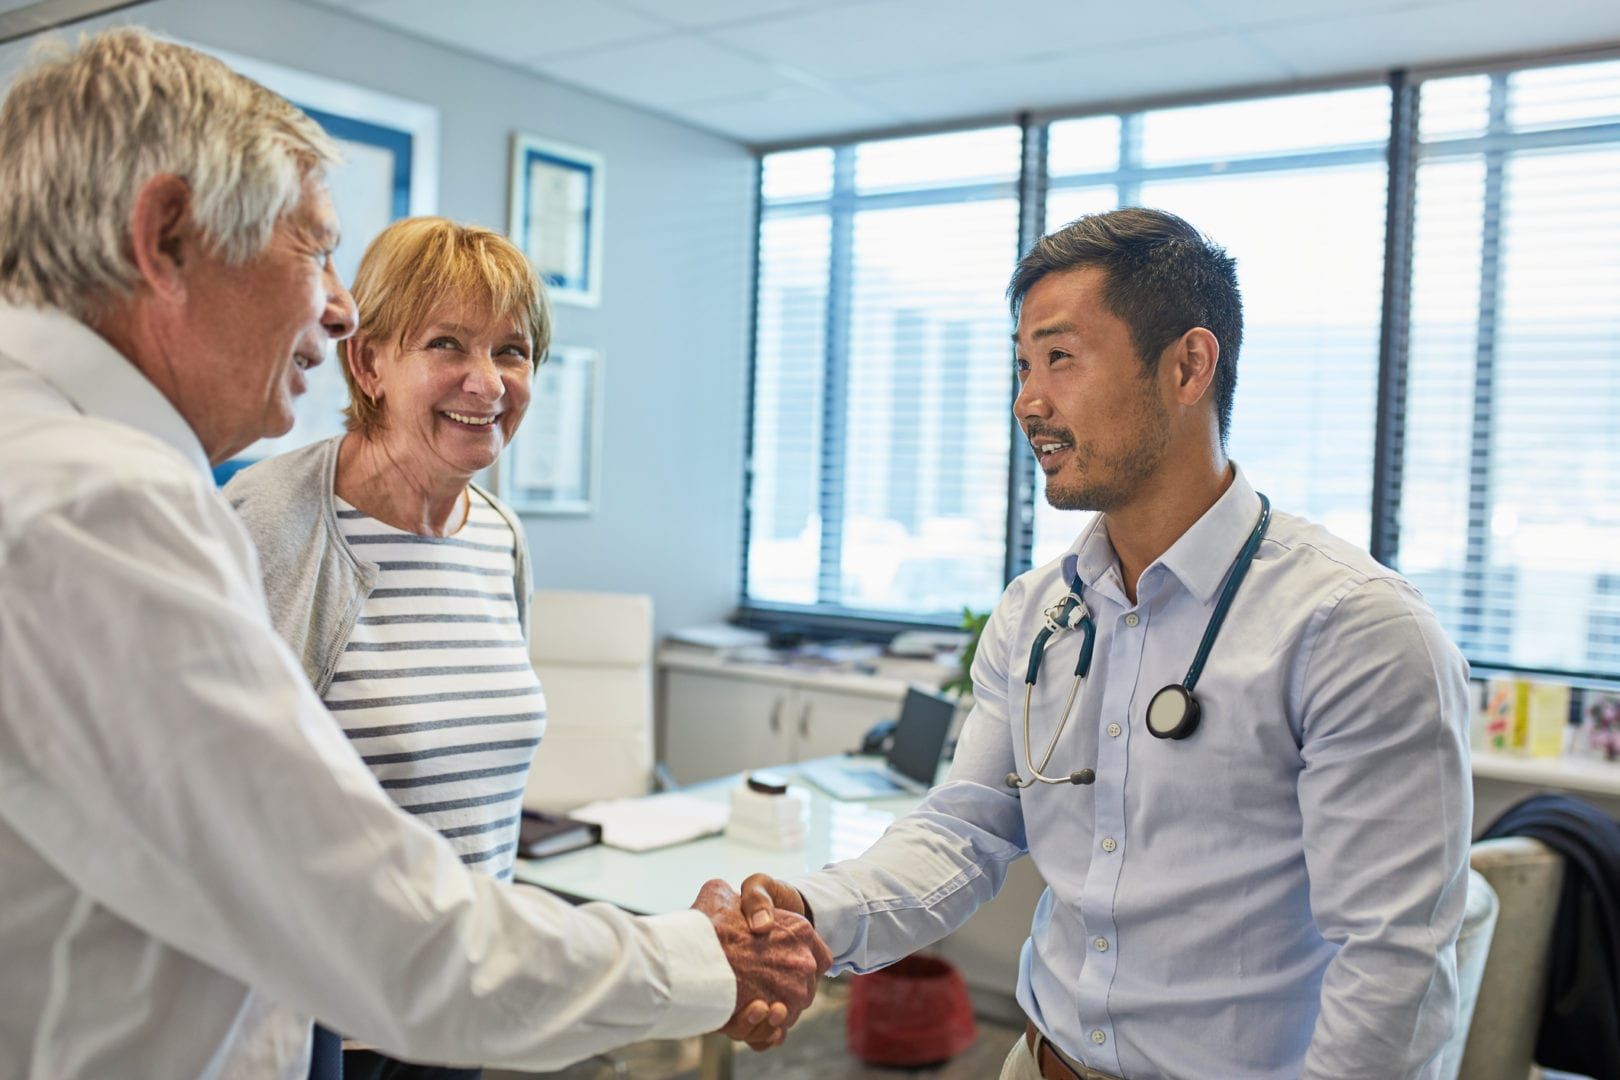 8 tips for communicating effectively with your parent’s medical team